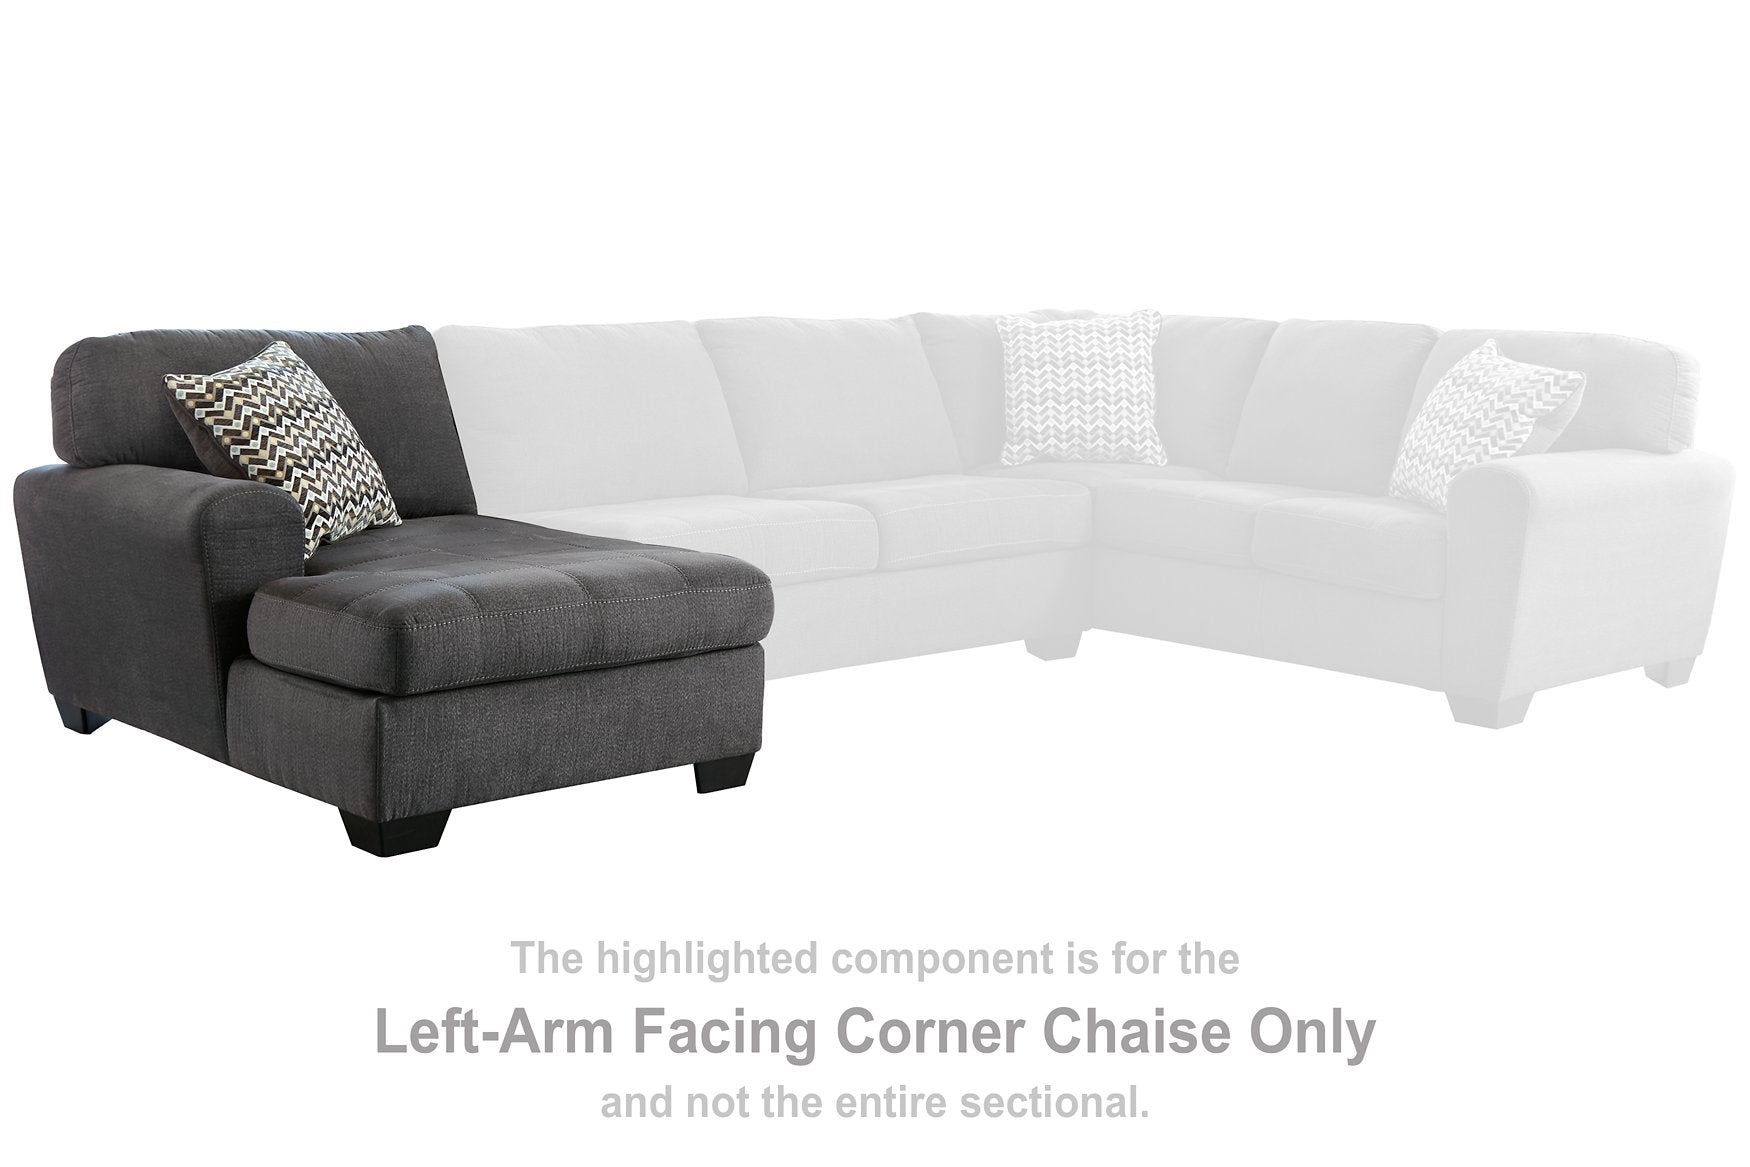 Ambee 3-Piece Sectional with Chaise - Half Price Furniture